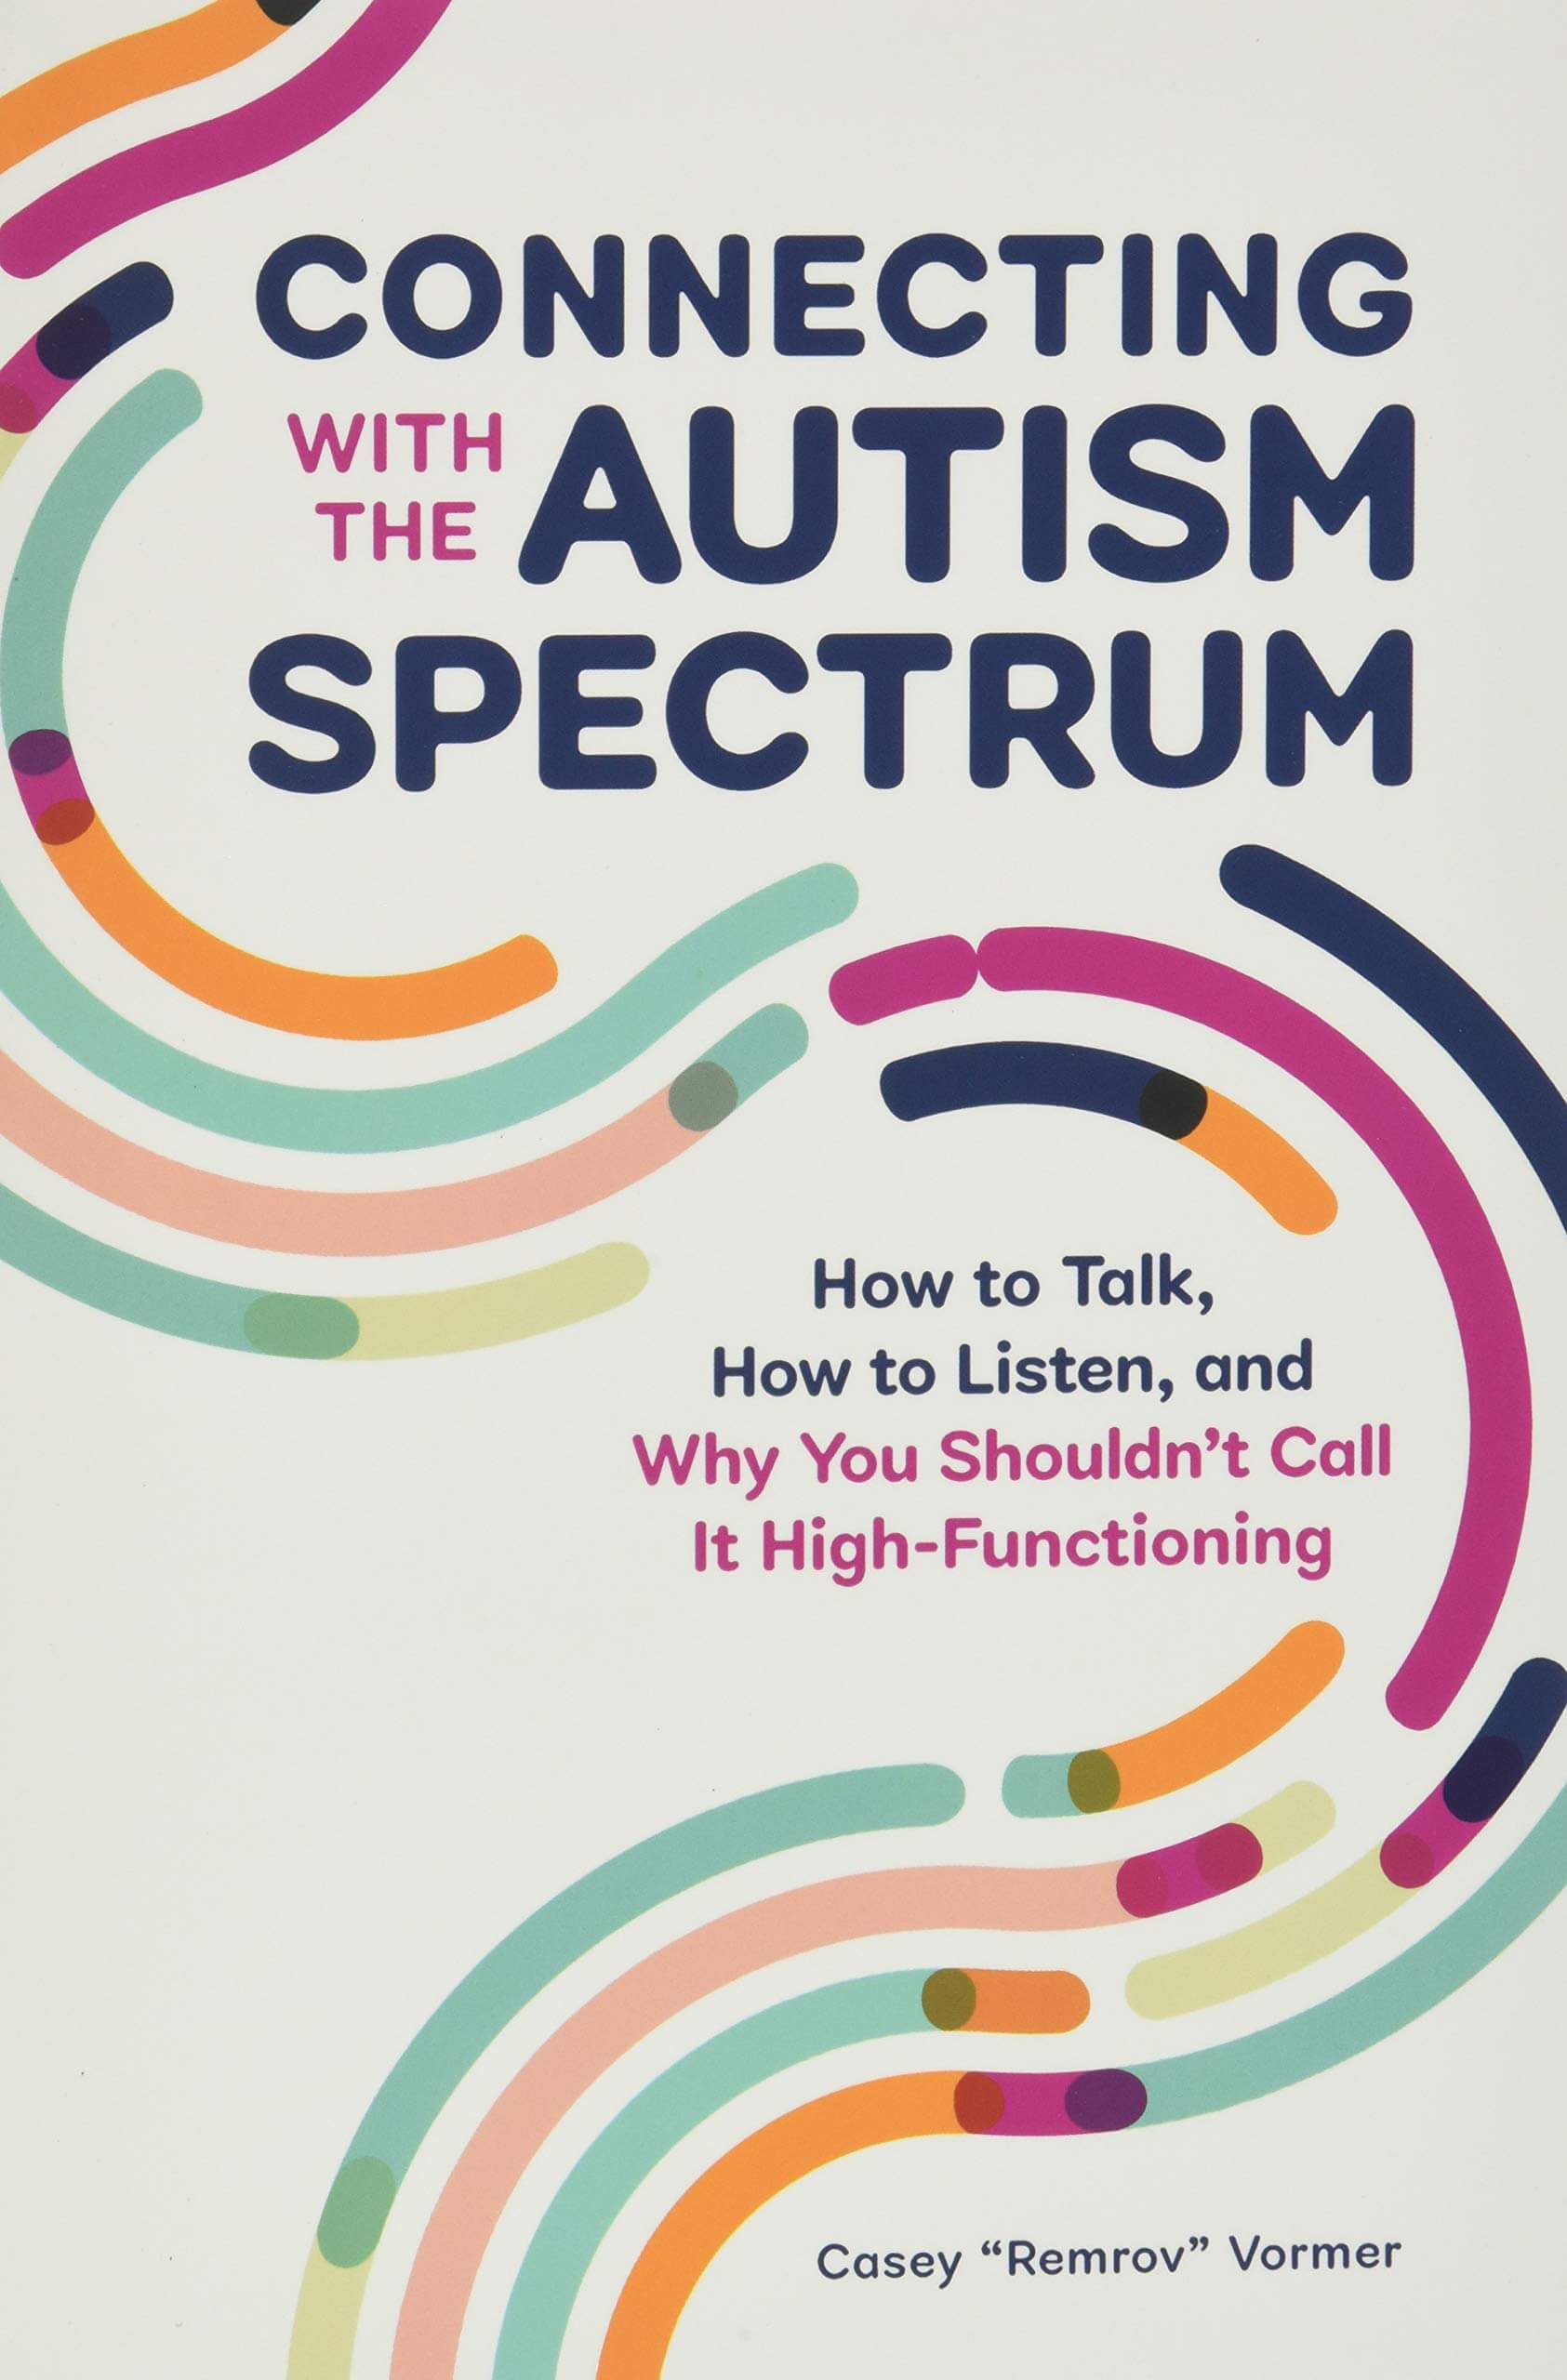 "Connecting With the Autism Spectrum" by Casey "Remrov" Vernor